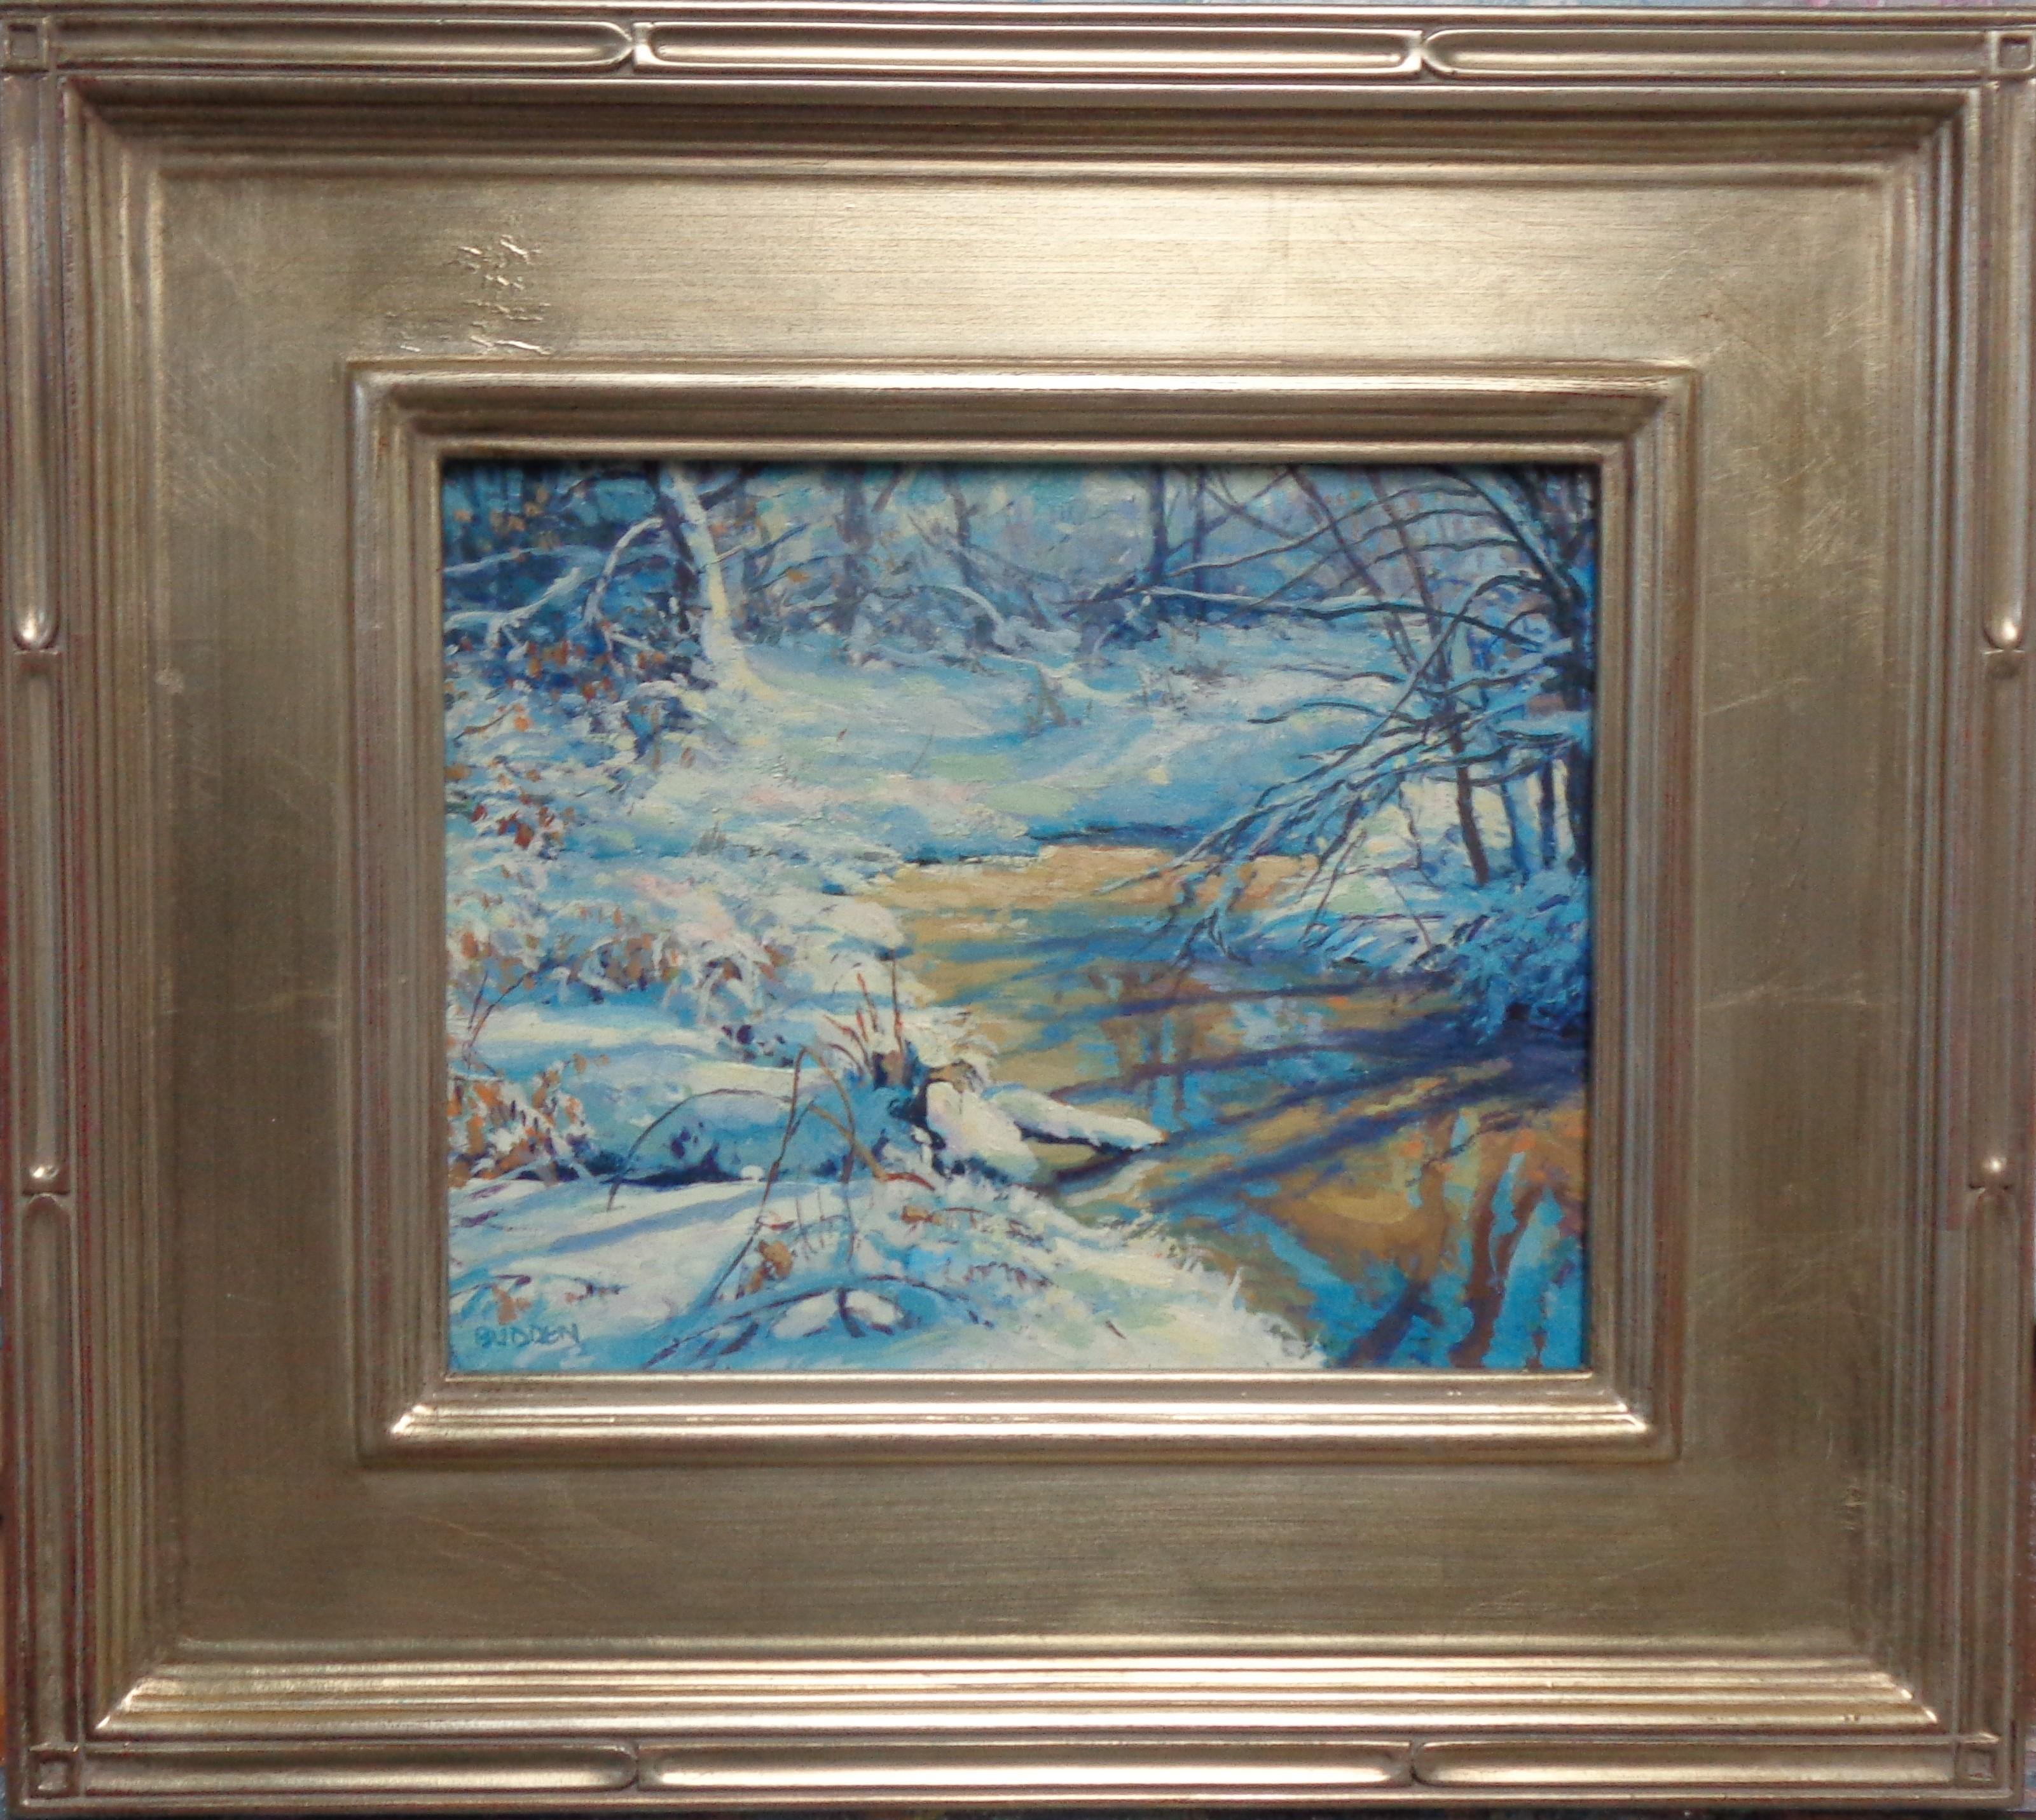 Winter Lace
oil/canvas panel
8 x 10 image unframed, 14.5 x 16.5 framed
Here is a beautiful winter scene that I did back in 08 and has hung in my studio since as an example of special lighting in a winter scene.
SELLERS STATEMENT
I have been in the